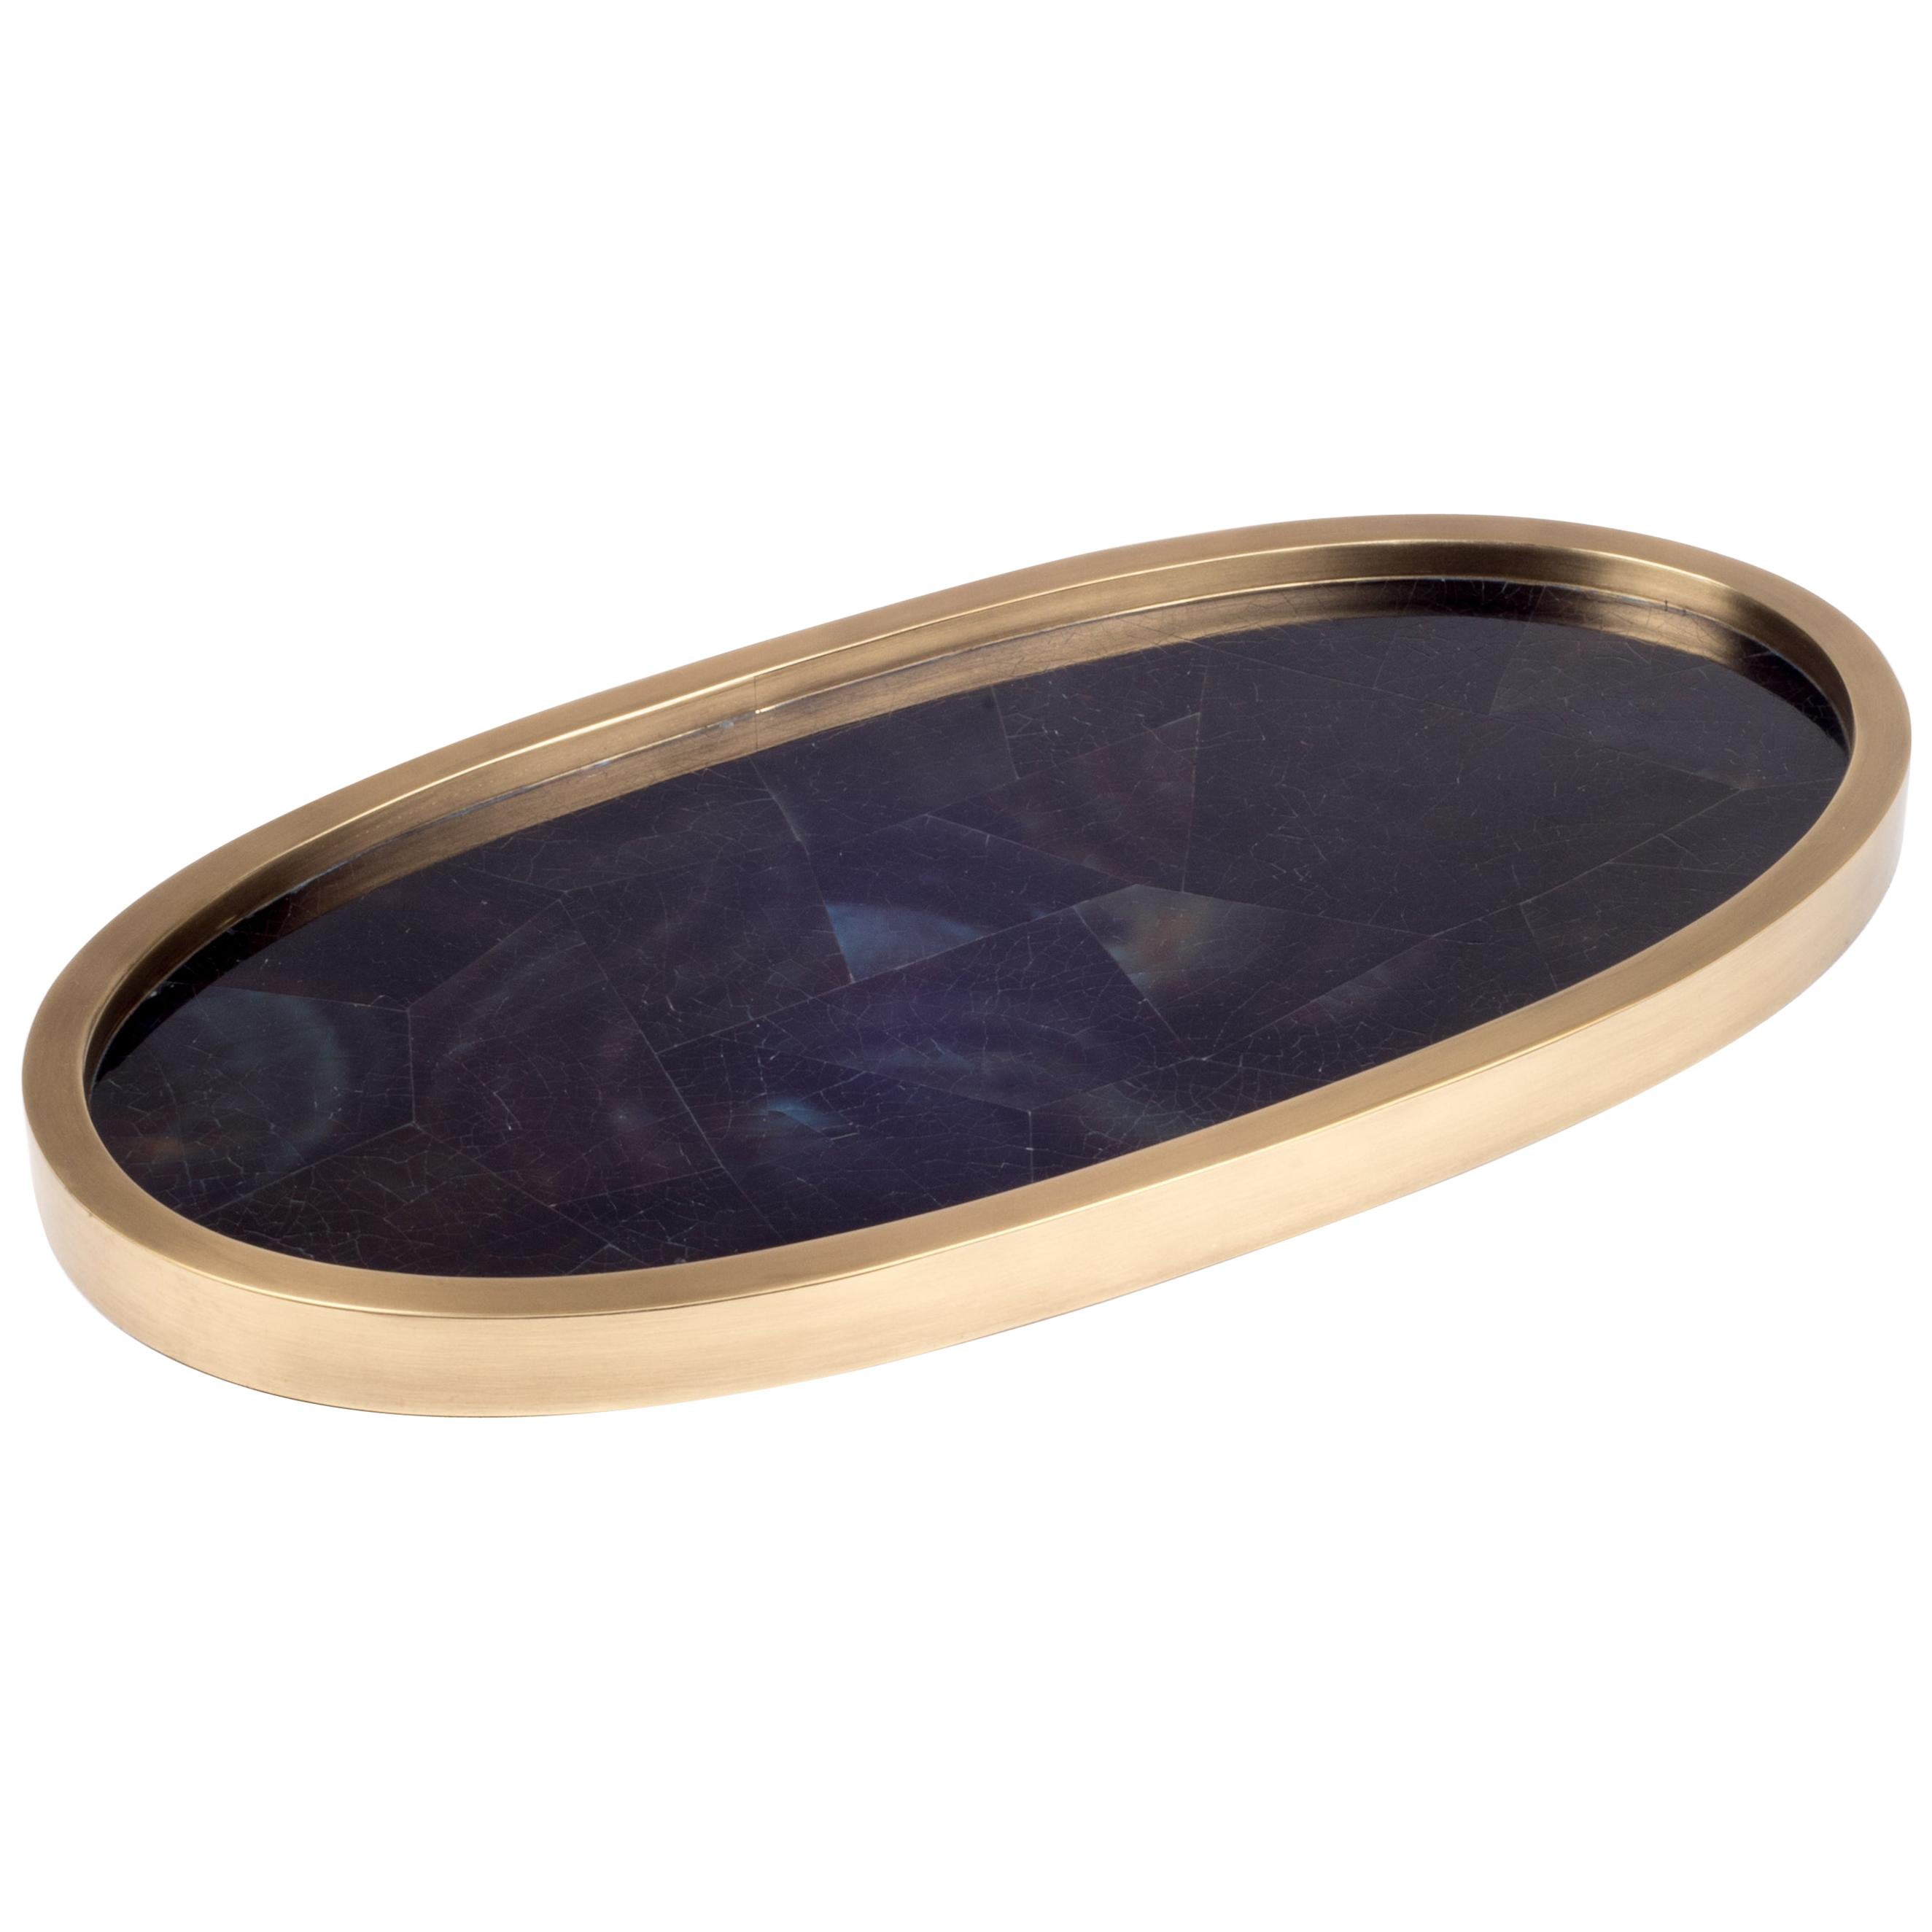 Oval Tray inlaid in Blue Shell and Brass by Kifu, Paris